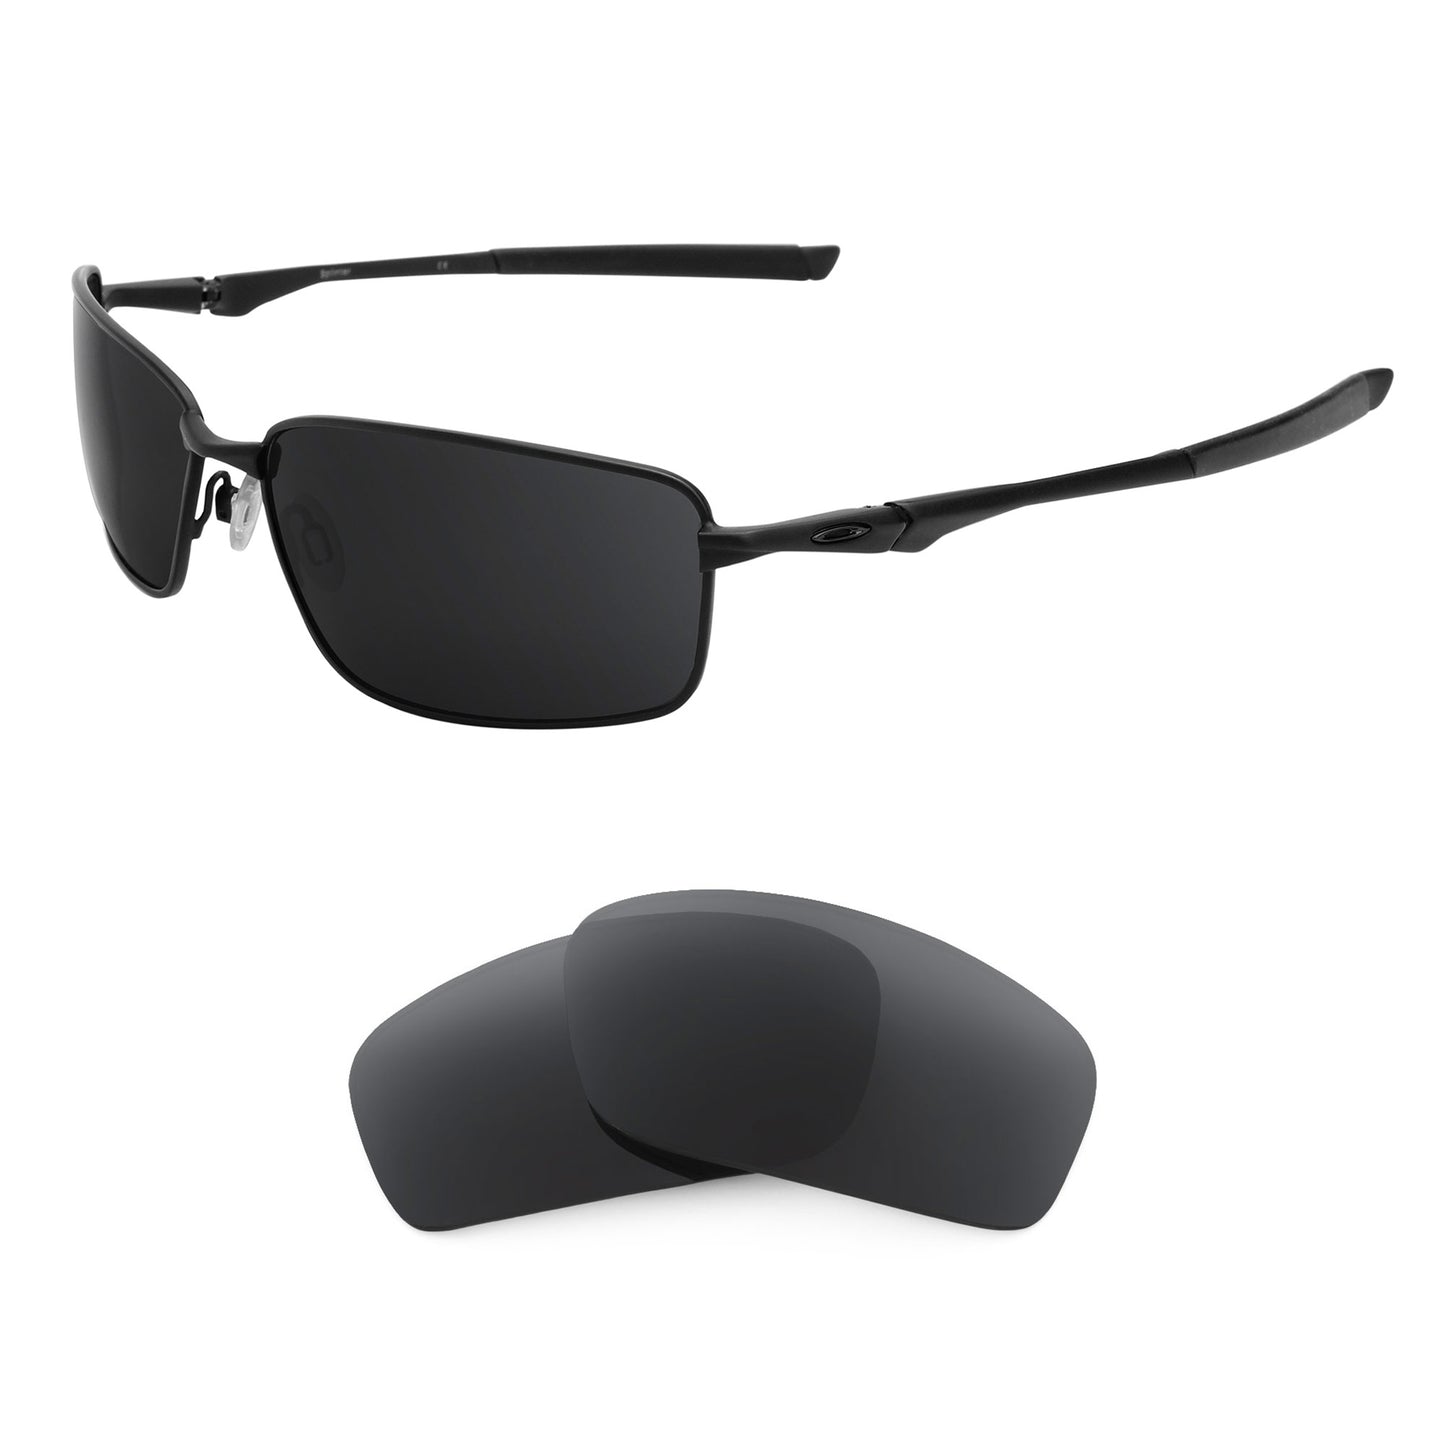 Oakley Splinter sunglasses with replacement lenses